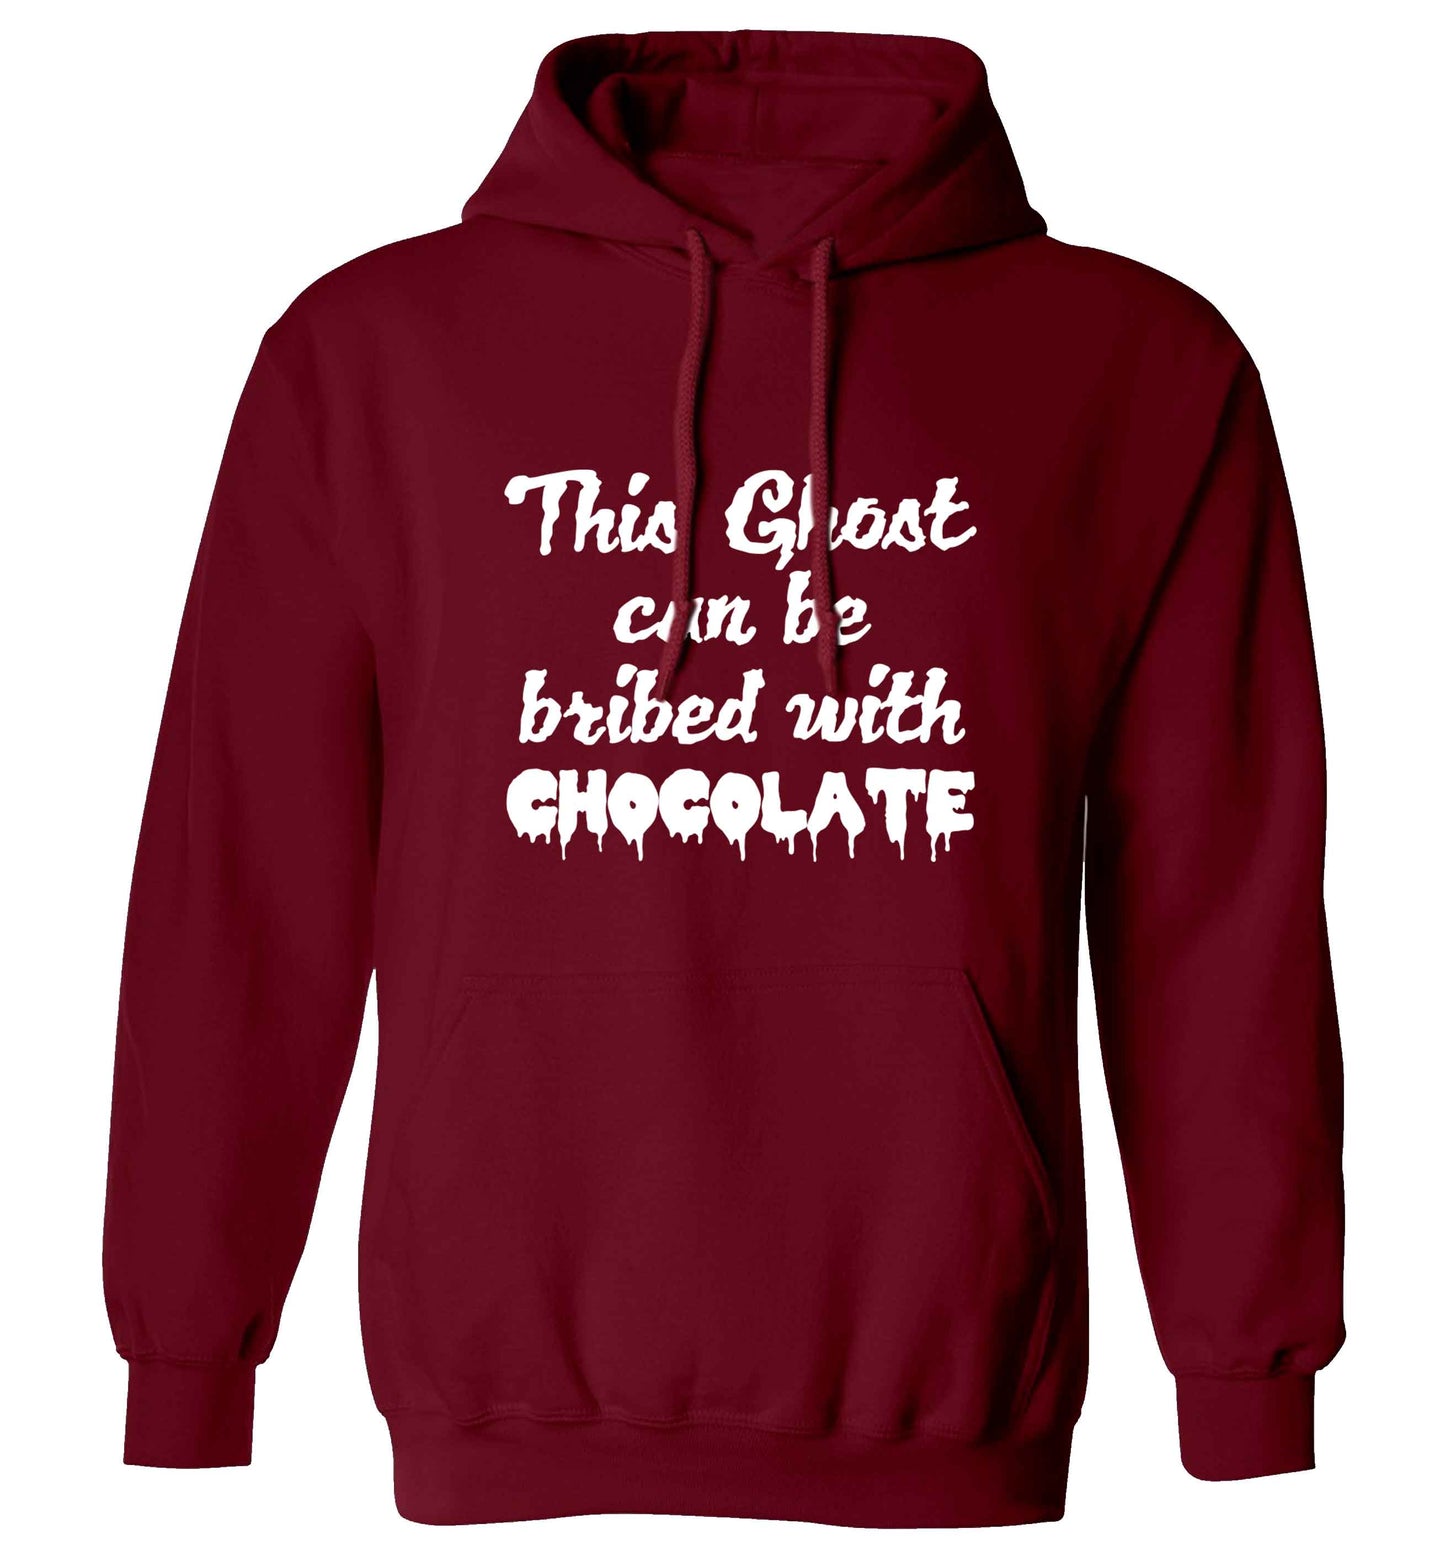 This ghost can be bribed with chocolate adults unisex maroon hoodie 2XL